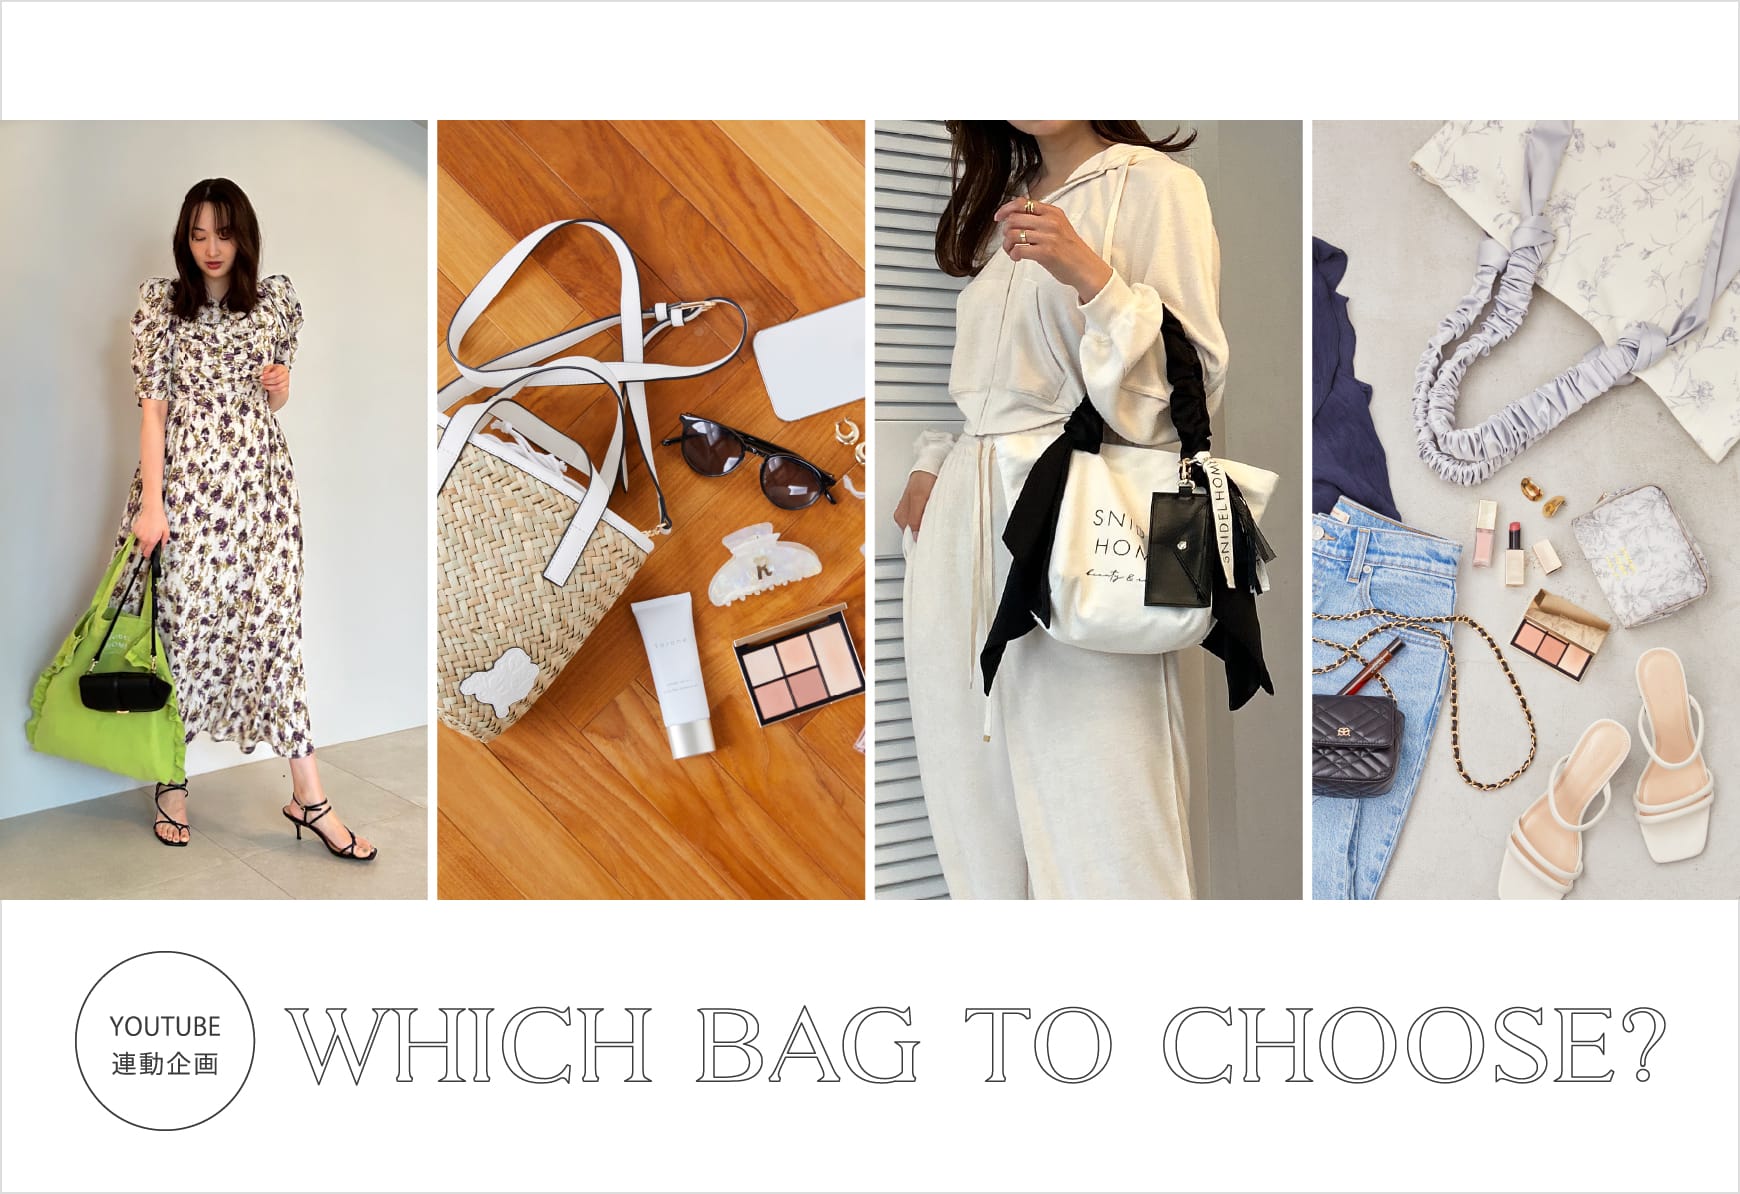 YouTube連動企画 WHICH BAG TO CHOOSE?